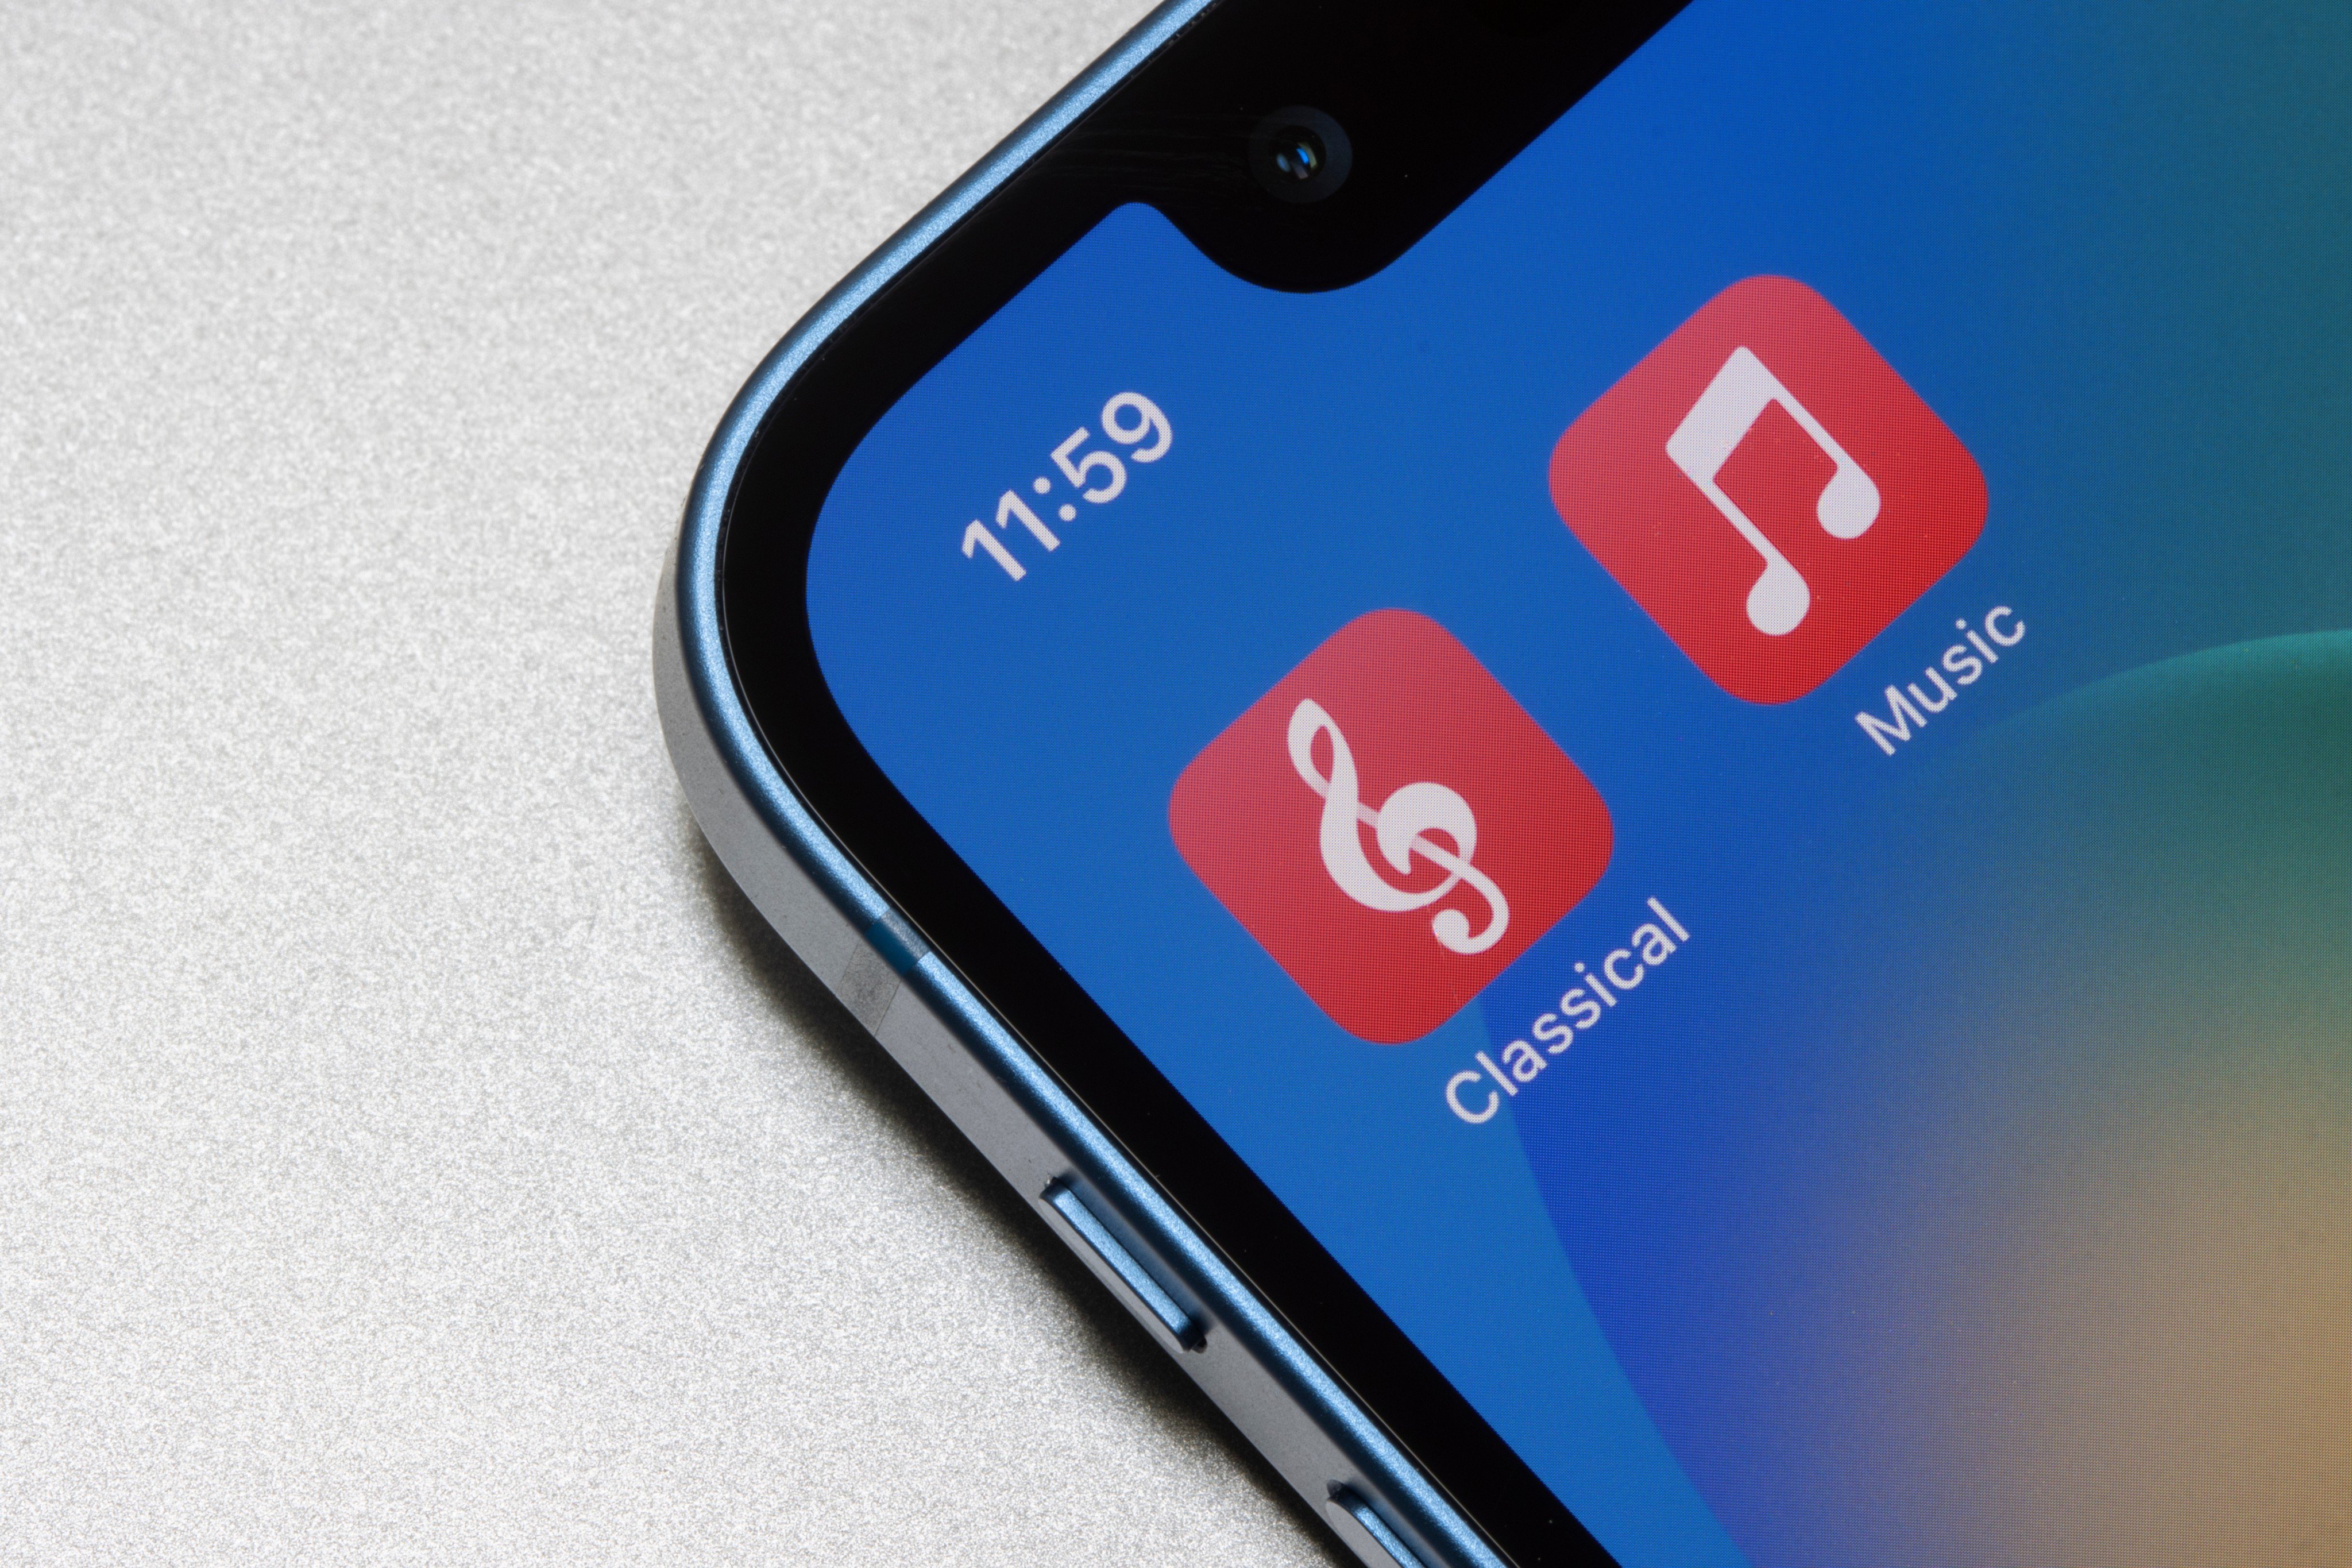 The Apple Music Classical app’s launch in China is likely to bolster the firm’s major digital services business in the country, which is its largest market in terms of App Store-related revenue. Photo: Shutterstock